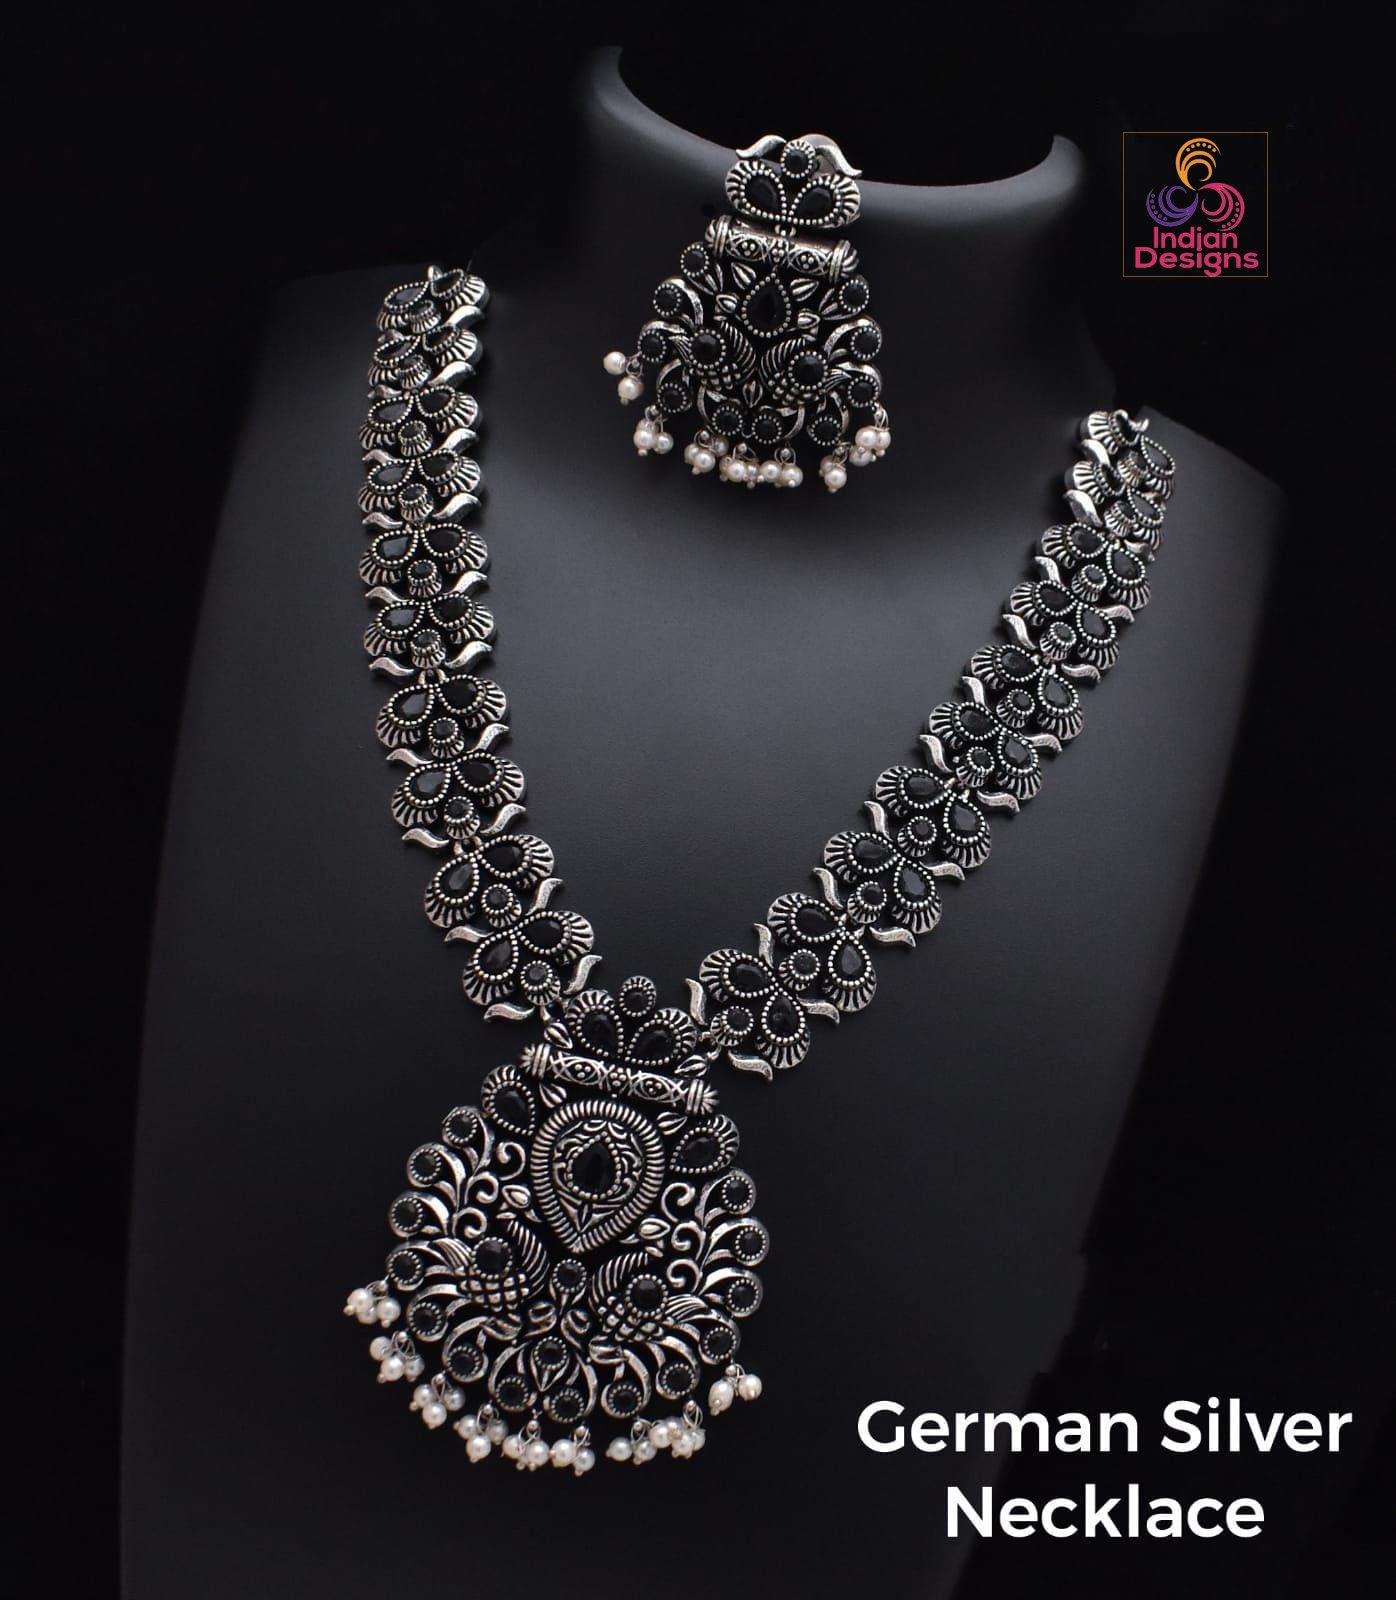 Oxidized German Silver Jewelry | Oxidized Silver jewellery for saree | Antique Silver necklace | Tribal Ethnic Necklace | Indian Jewelry